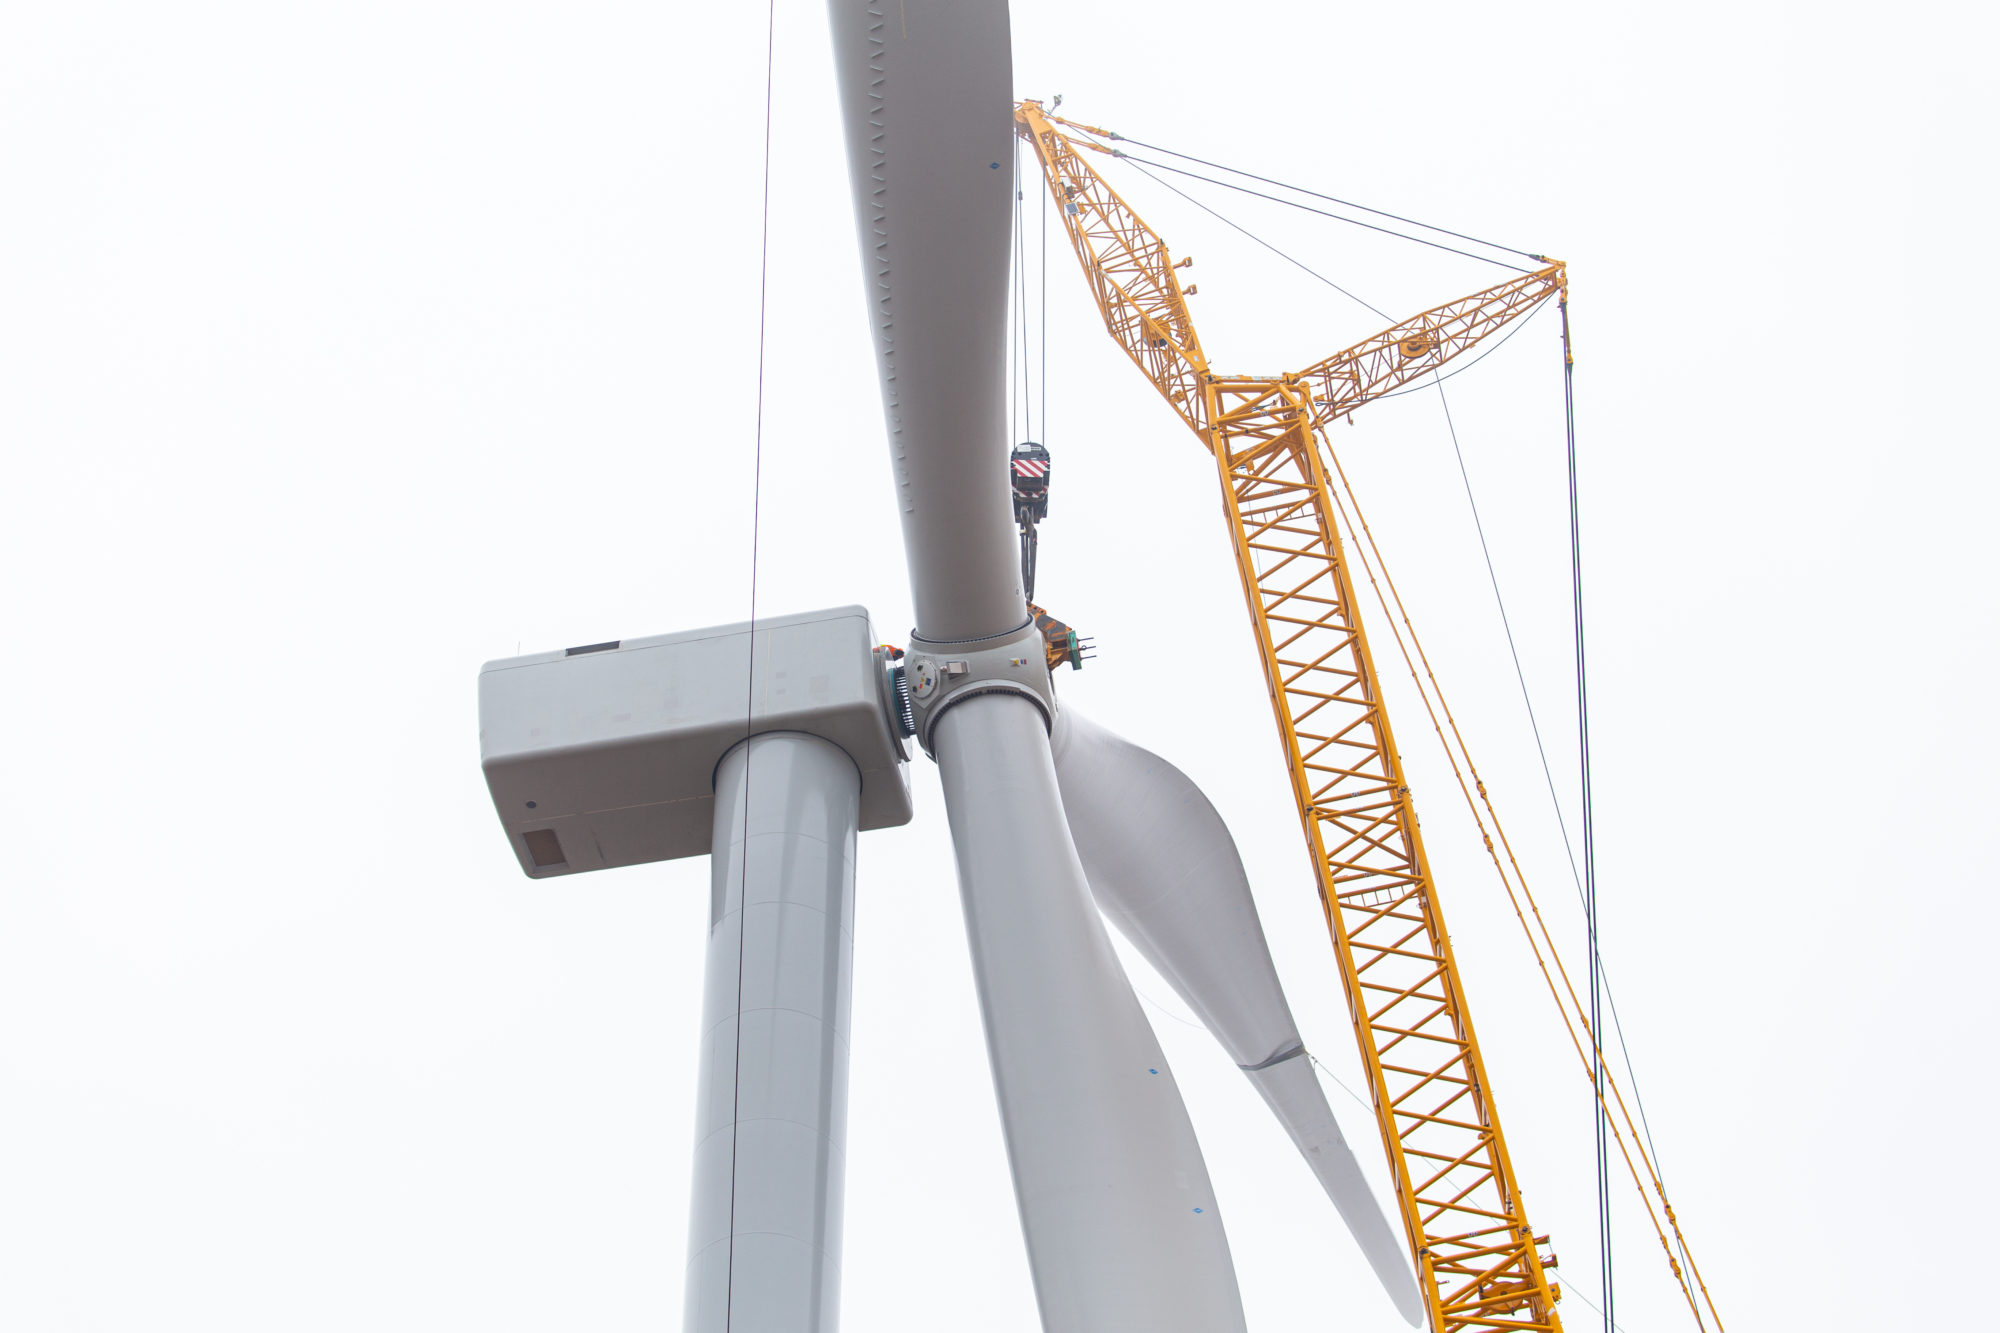 Close-up of windmill with crane